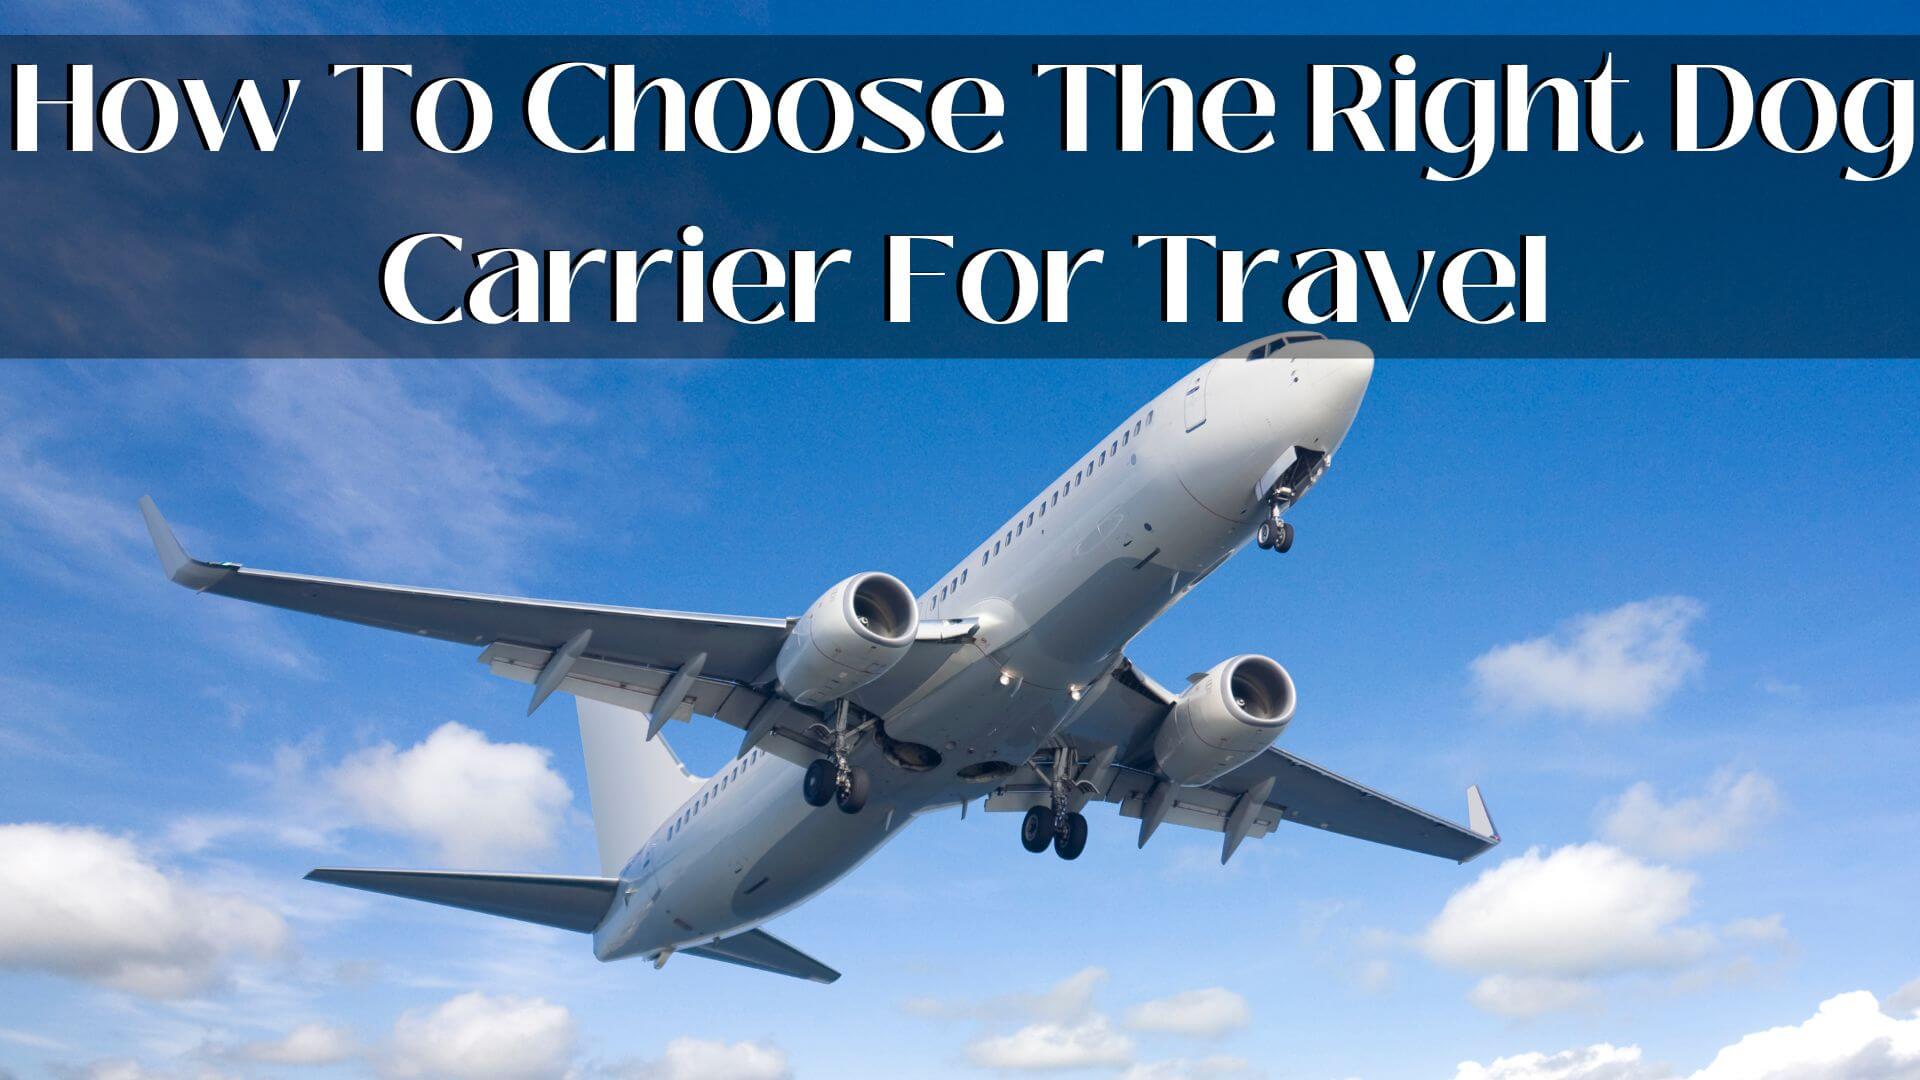 How To Choose The Right Dog Carrier For Travel